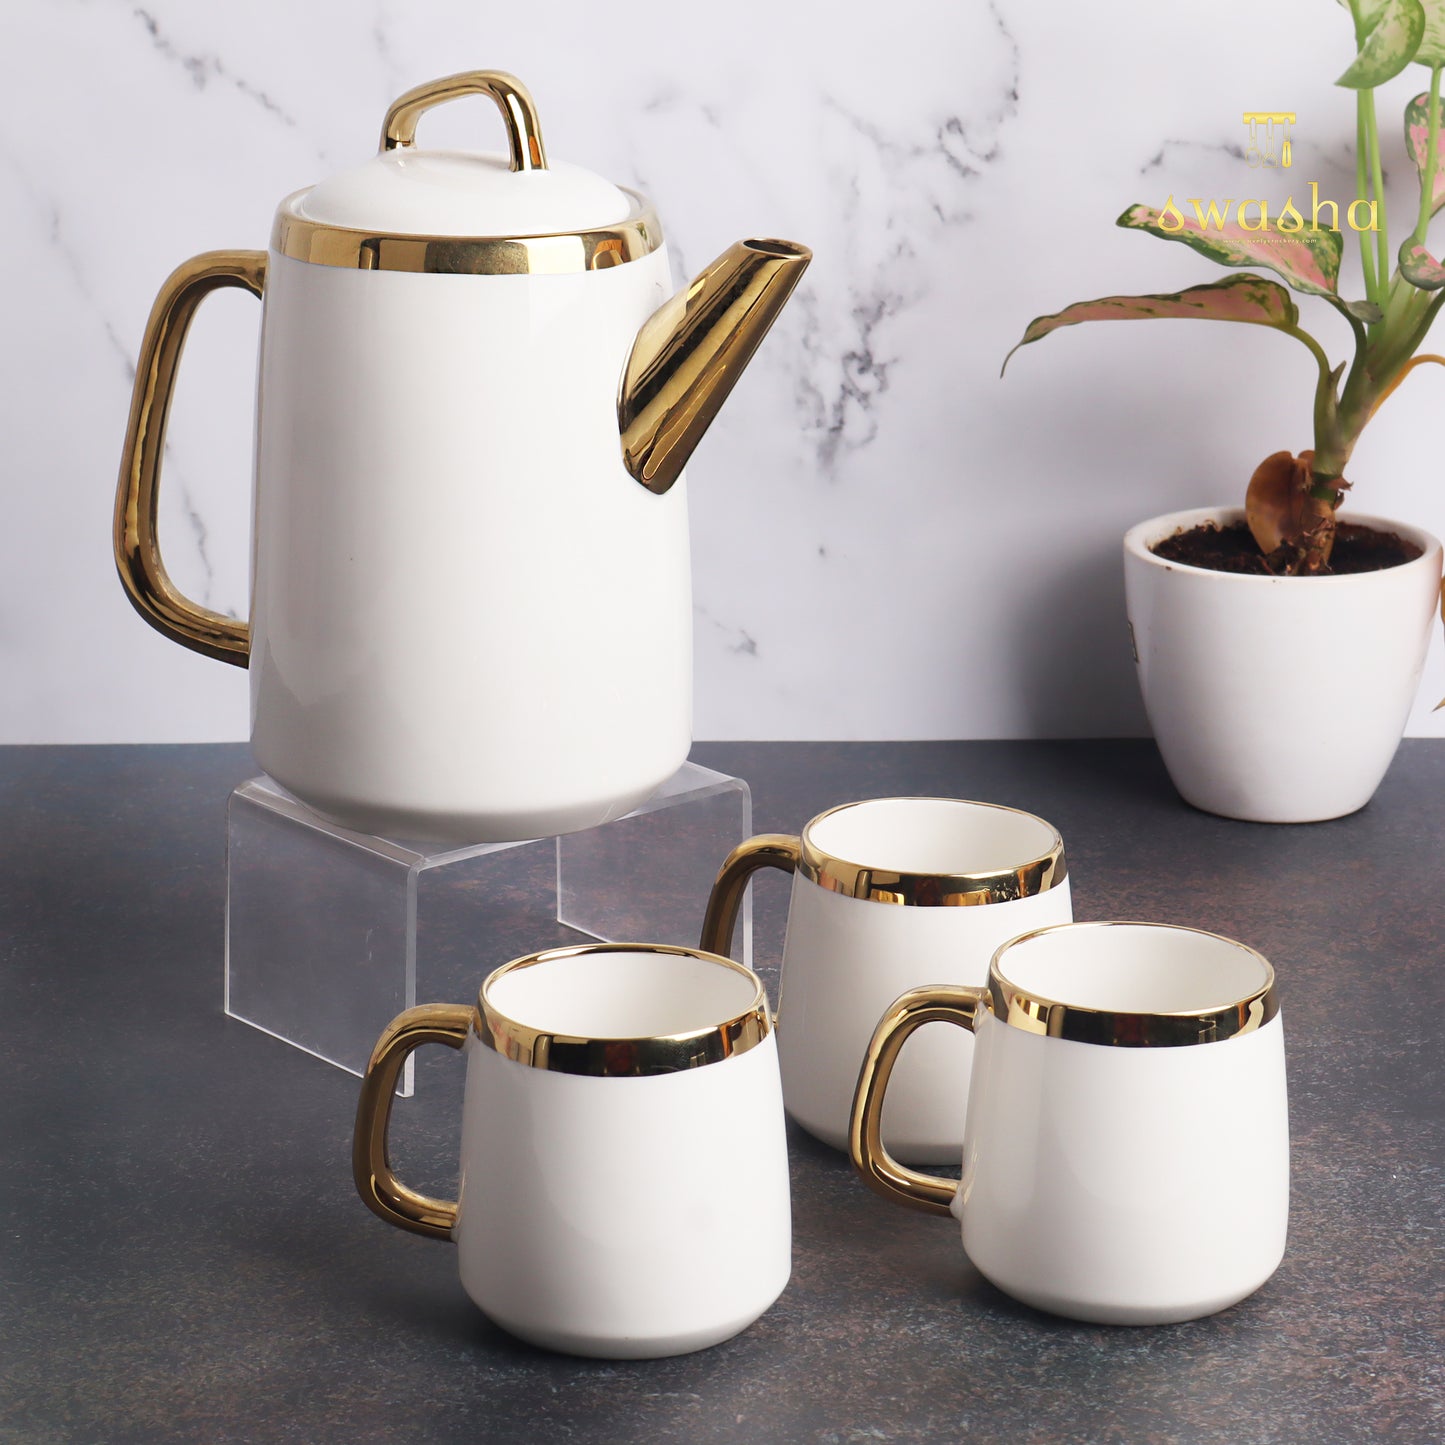 Set of 6 ceramic cups with matching kettle - perfect for delightful tea sessions